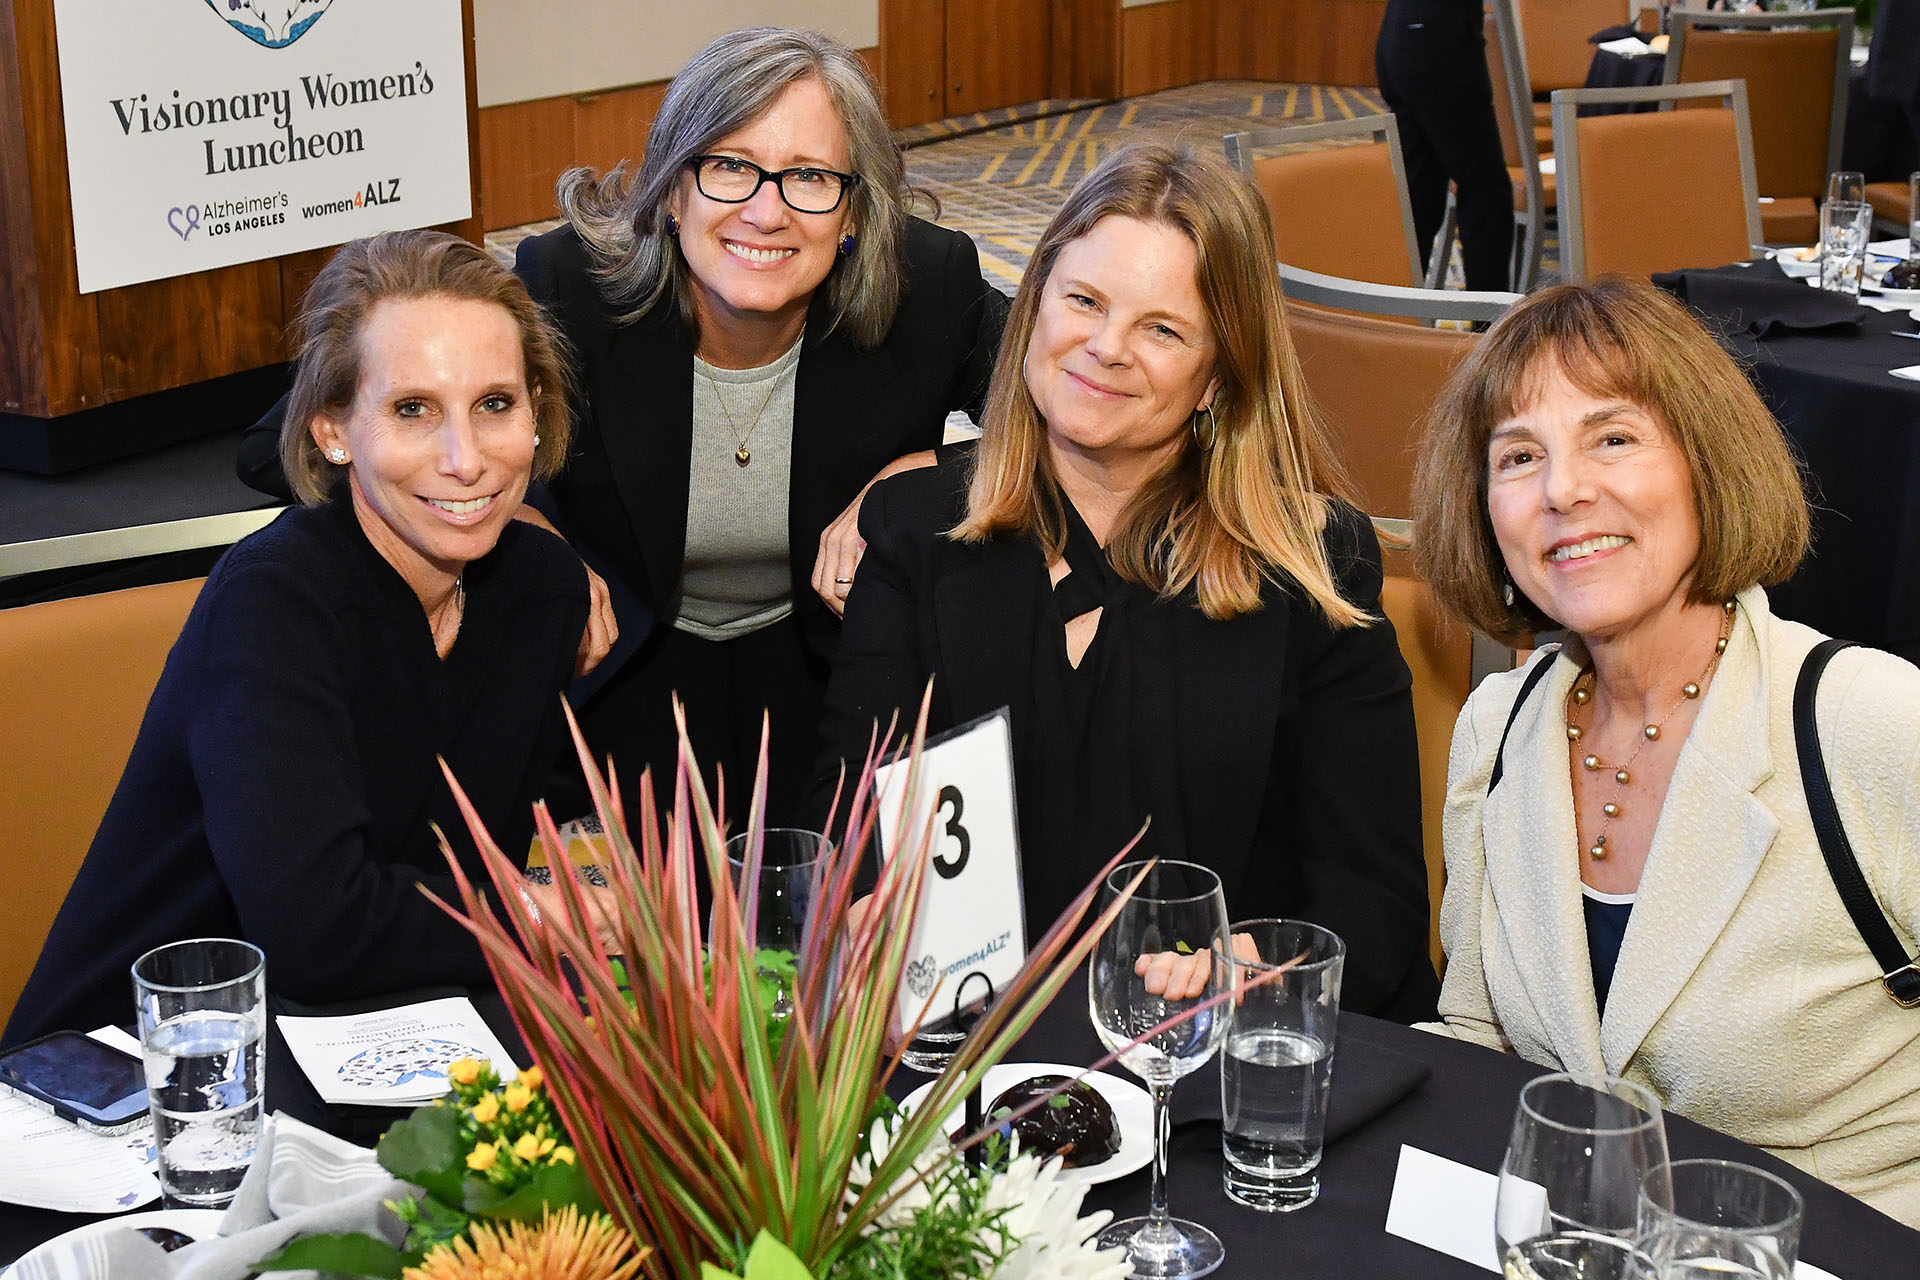 Susan Disney Lord and attendees at the 2019 Visionary Womens Luncheon